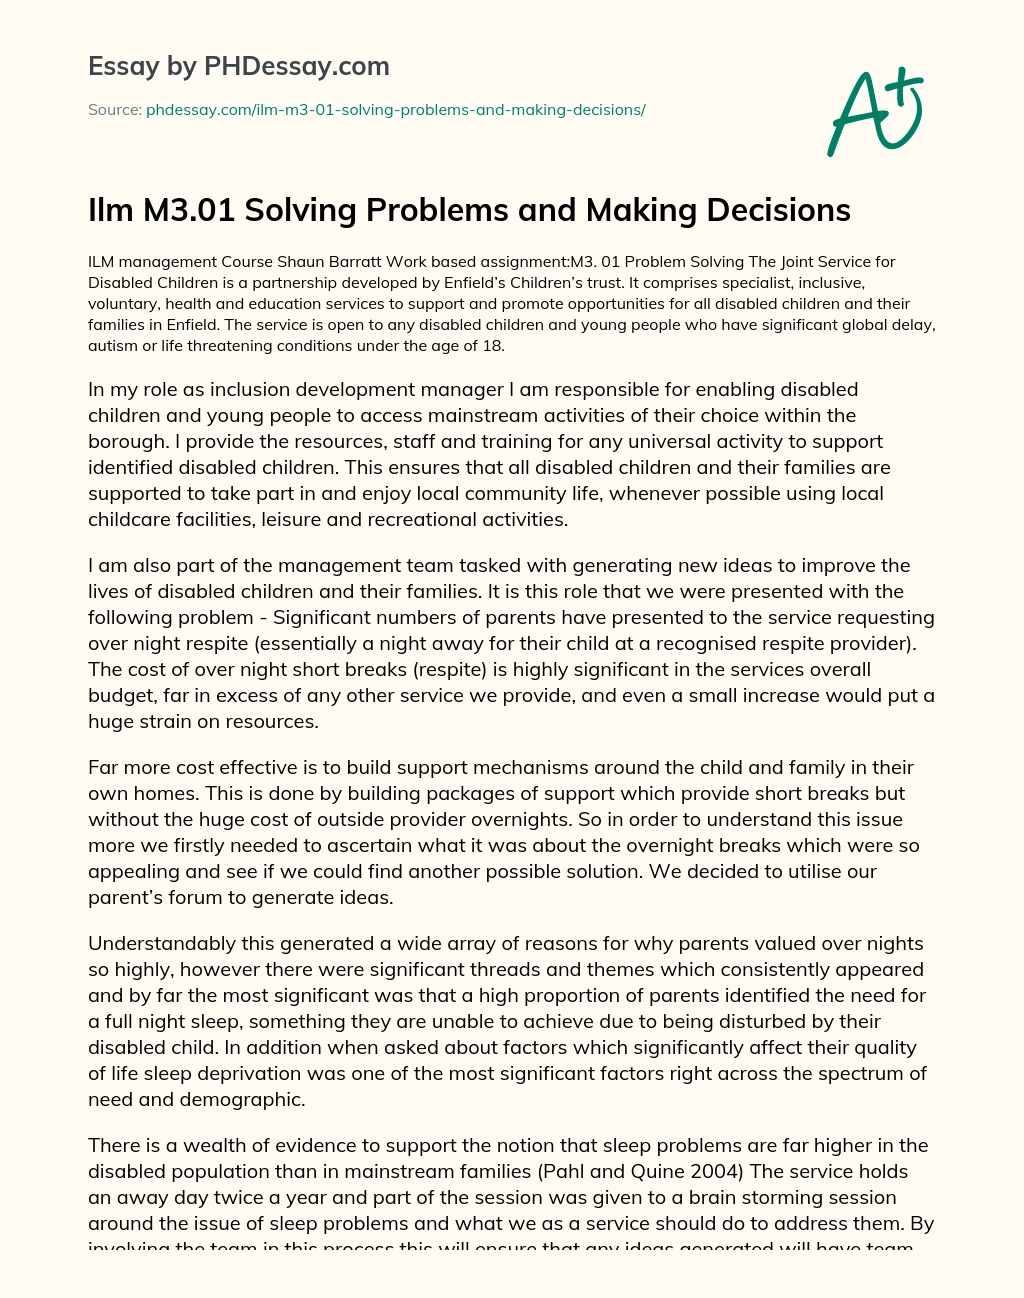 Solving Problems and Making Decisions essay